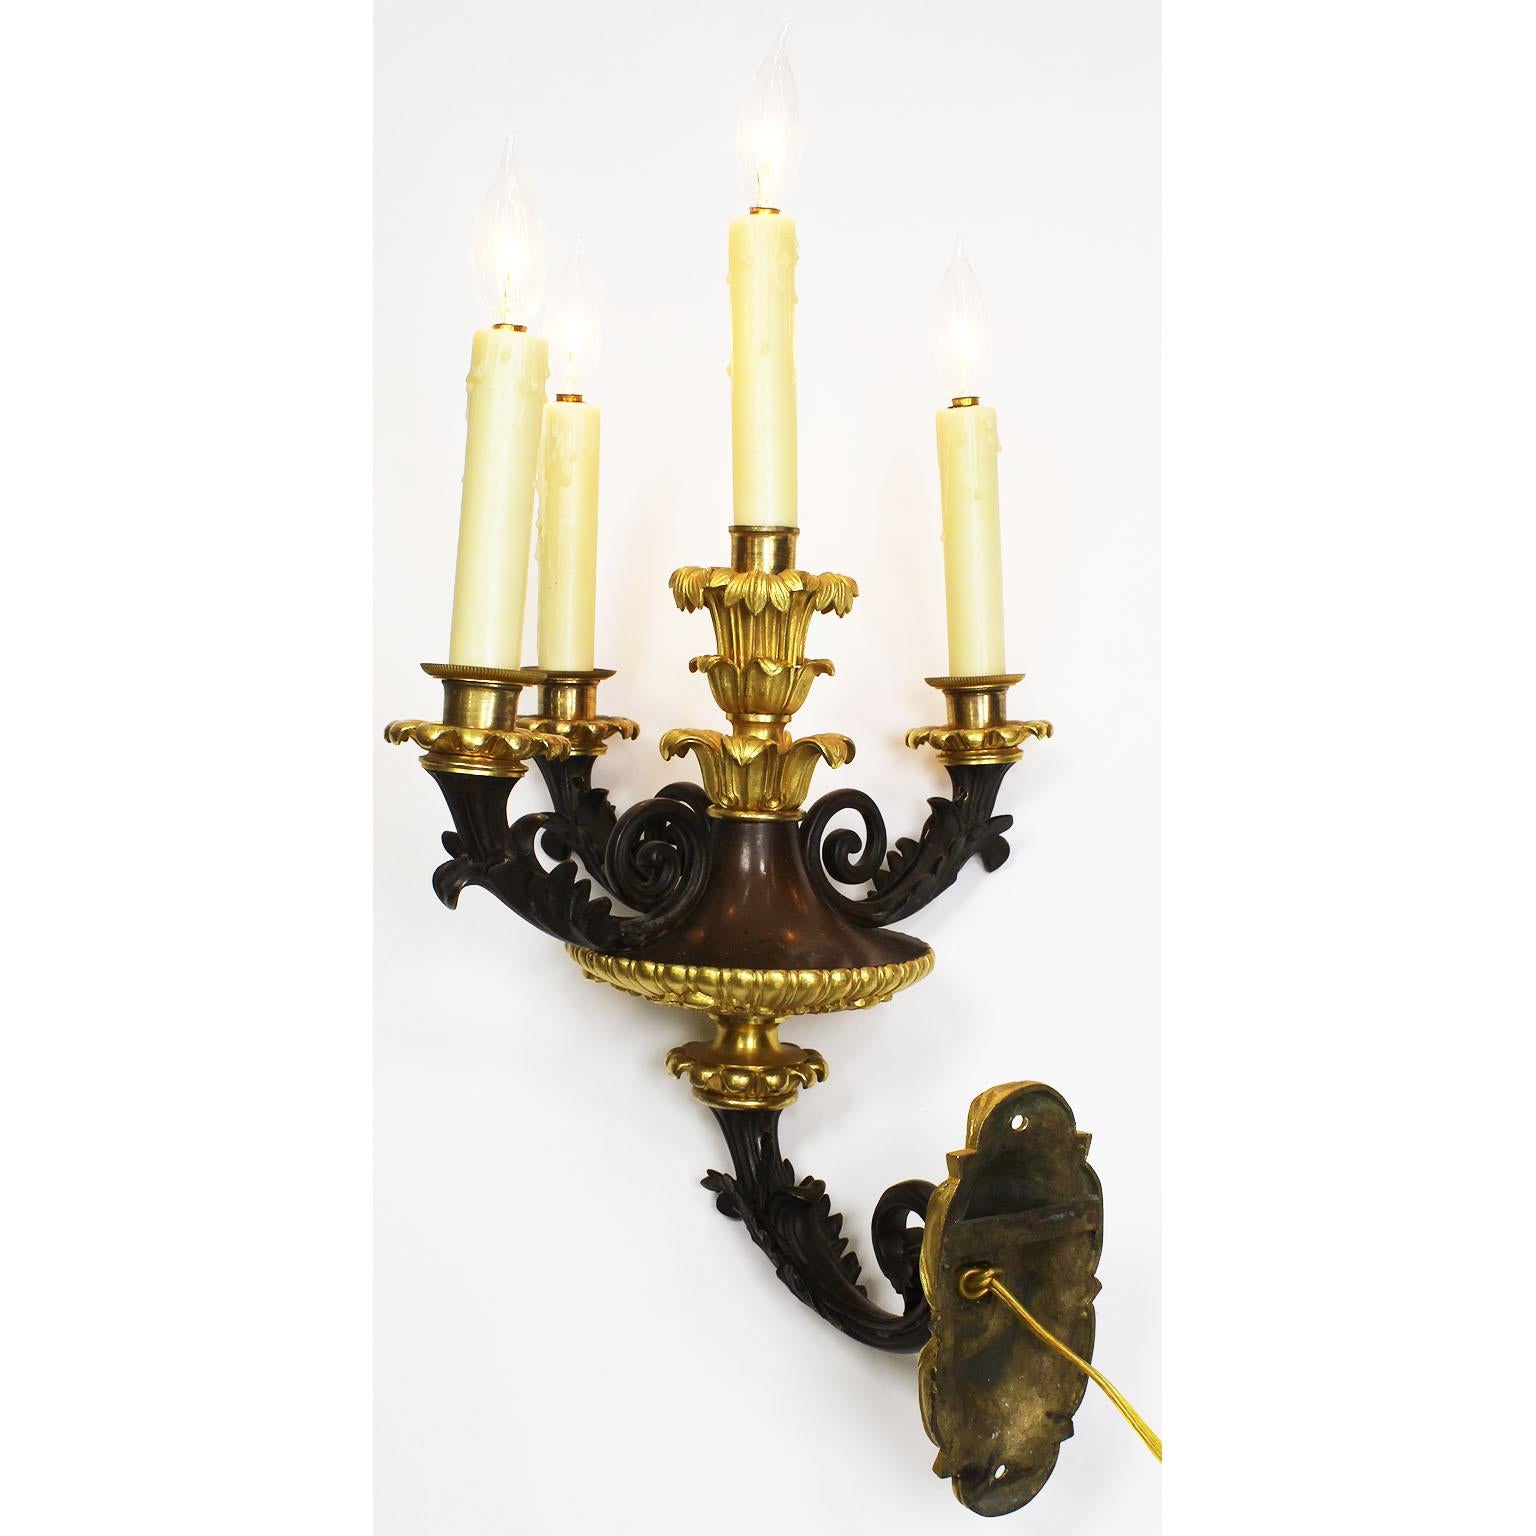 Patinated French 19th Century Neoclassical Empire Revival Style Bronze Wall Sconces, Pair For Sale